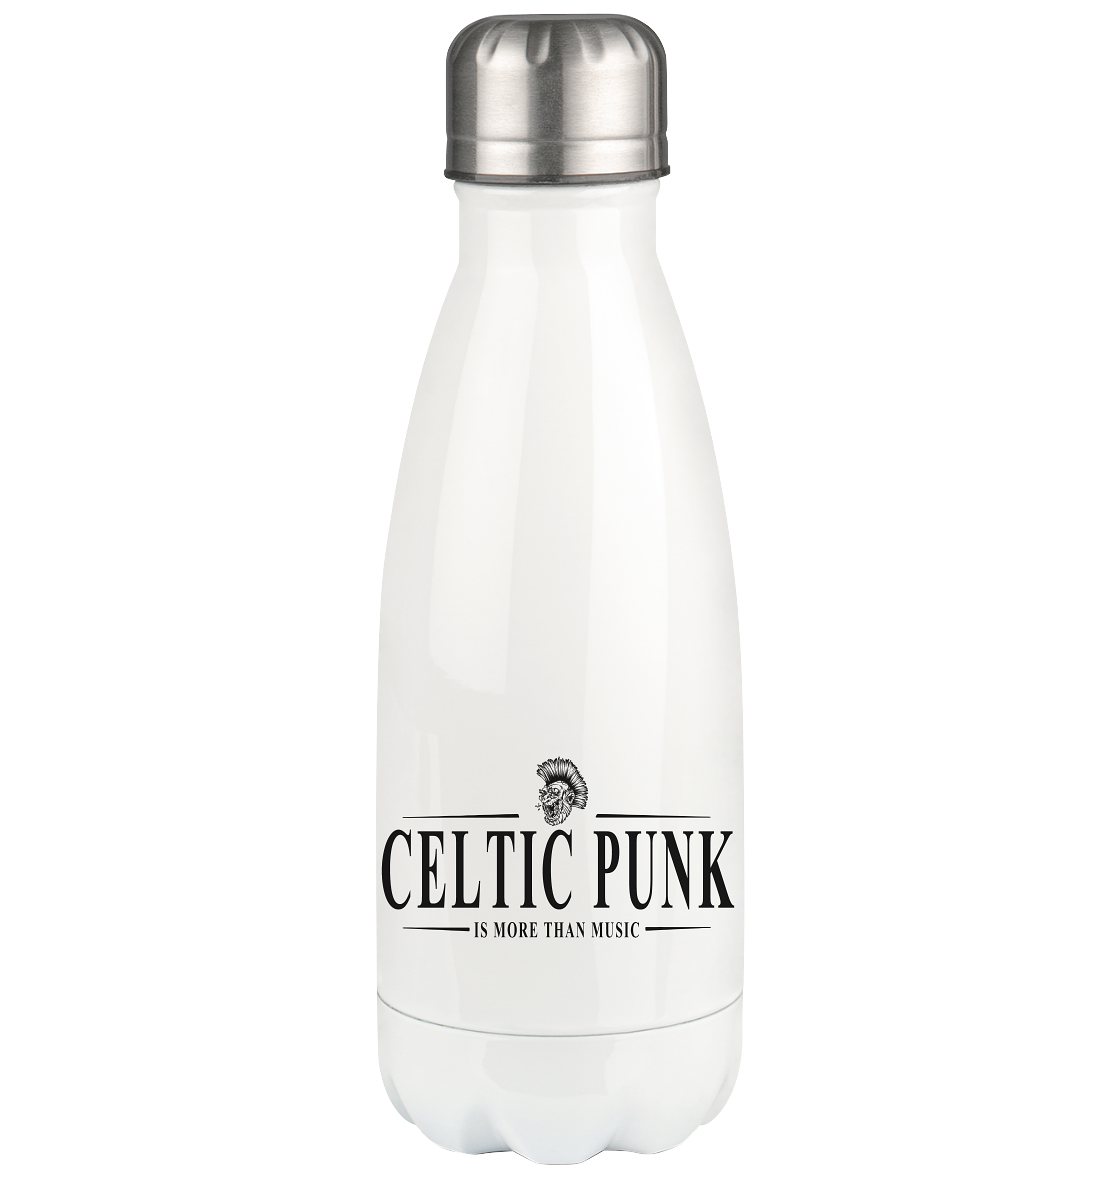 Celtic Punk "Is More Than Music" - Thermoflasche 350ml